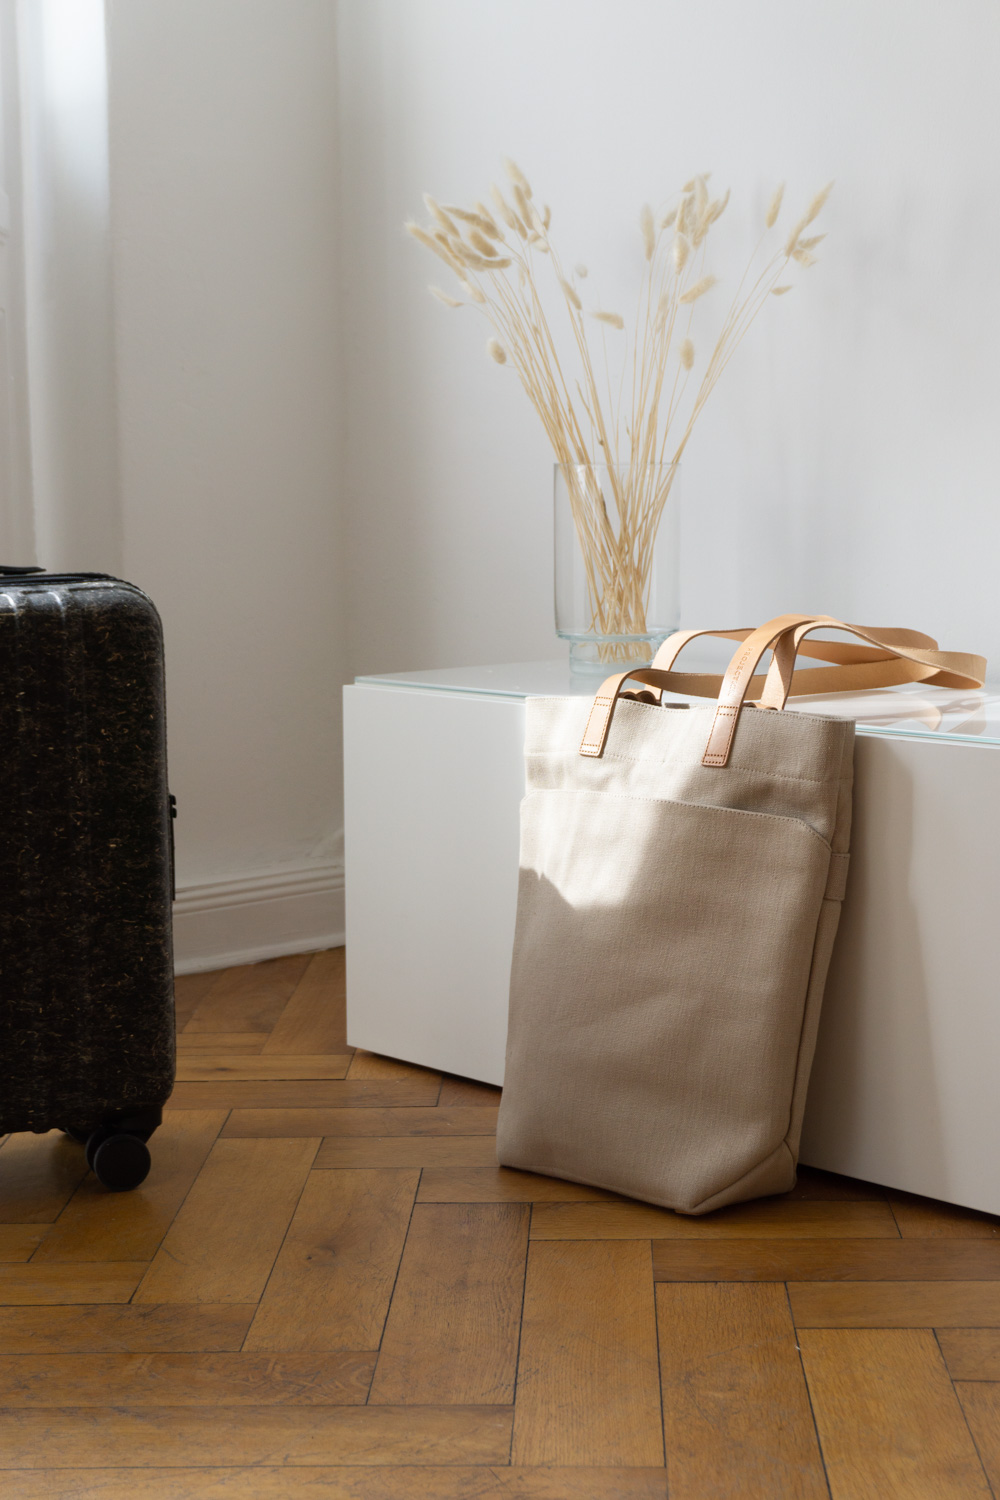 PROJECTKIN Travel Suitcase & Canvas Bag - Sustainable Luggage and travel accessories from eco friendly materials | Danish design, Scandinavian products, mindful accessories, luggage | product photography, shadows, light, minimalist aesthetic | RG Daily Blog